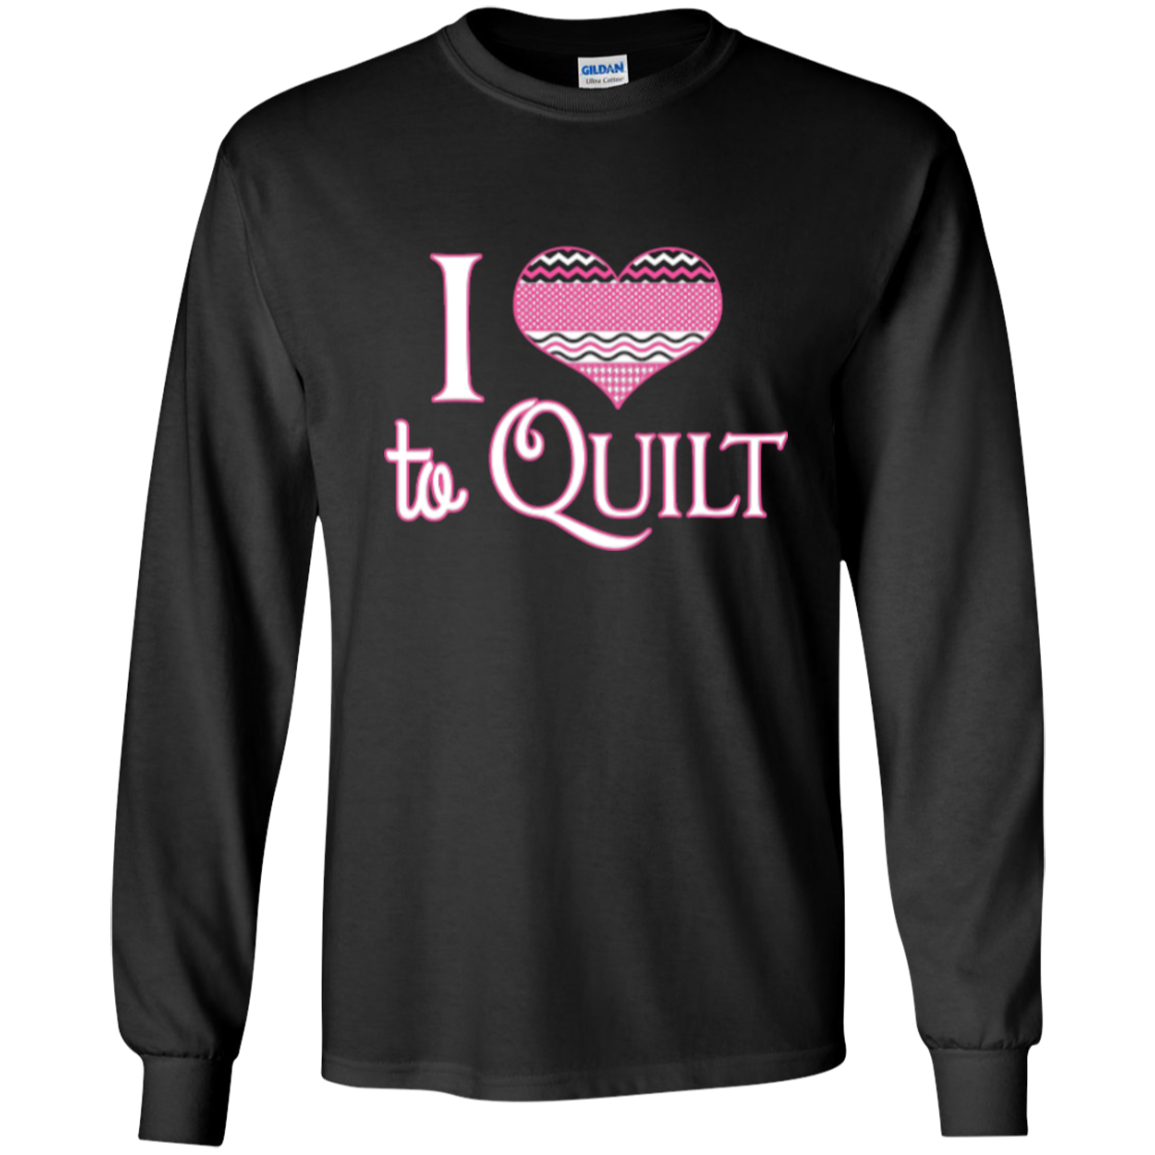 I Heart to Quilt Long Sleeve Ultra Cotton T-Shirt - Crafter4Life - 3